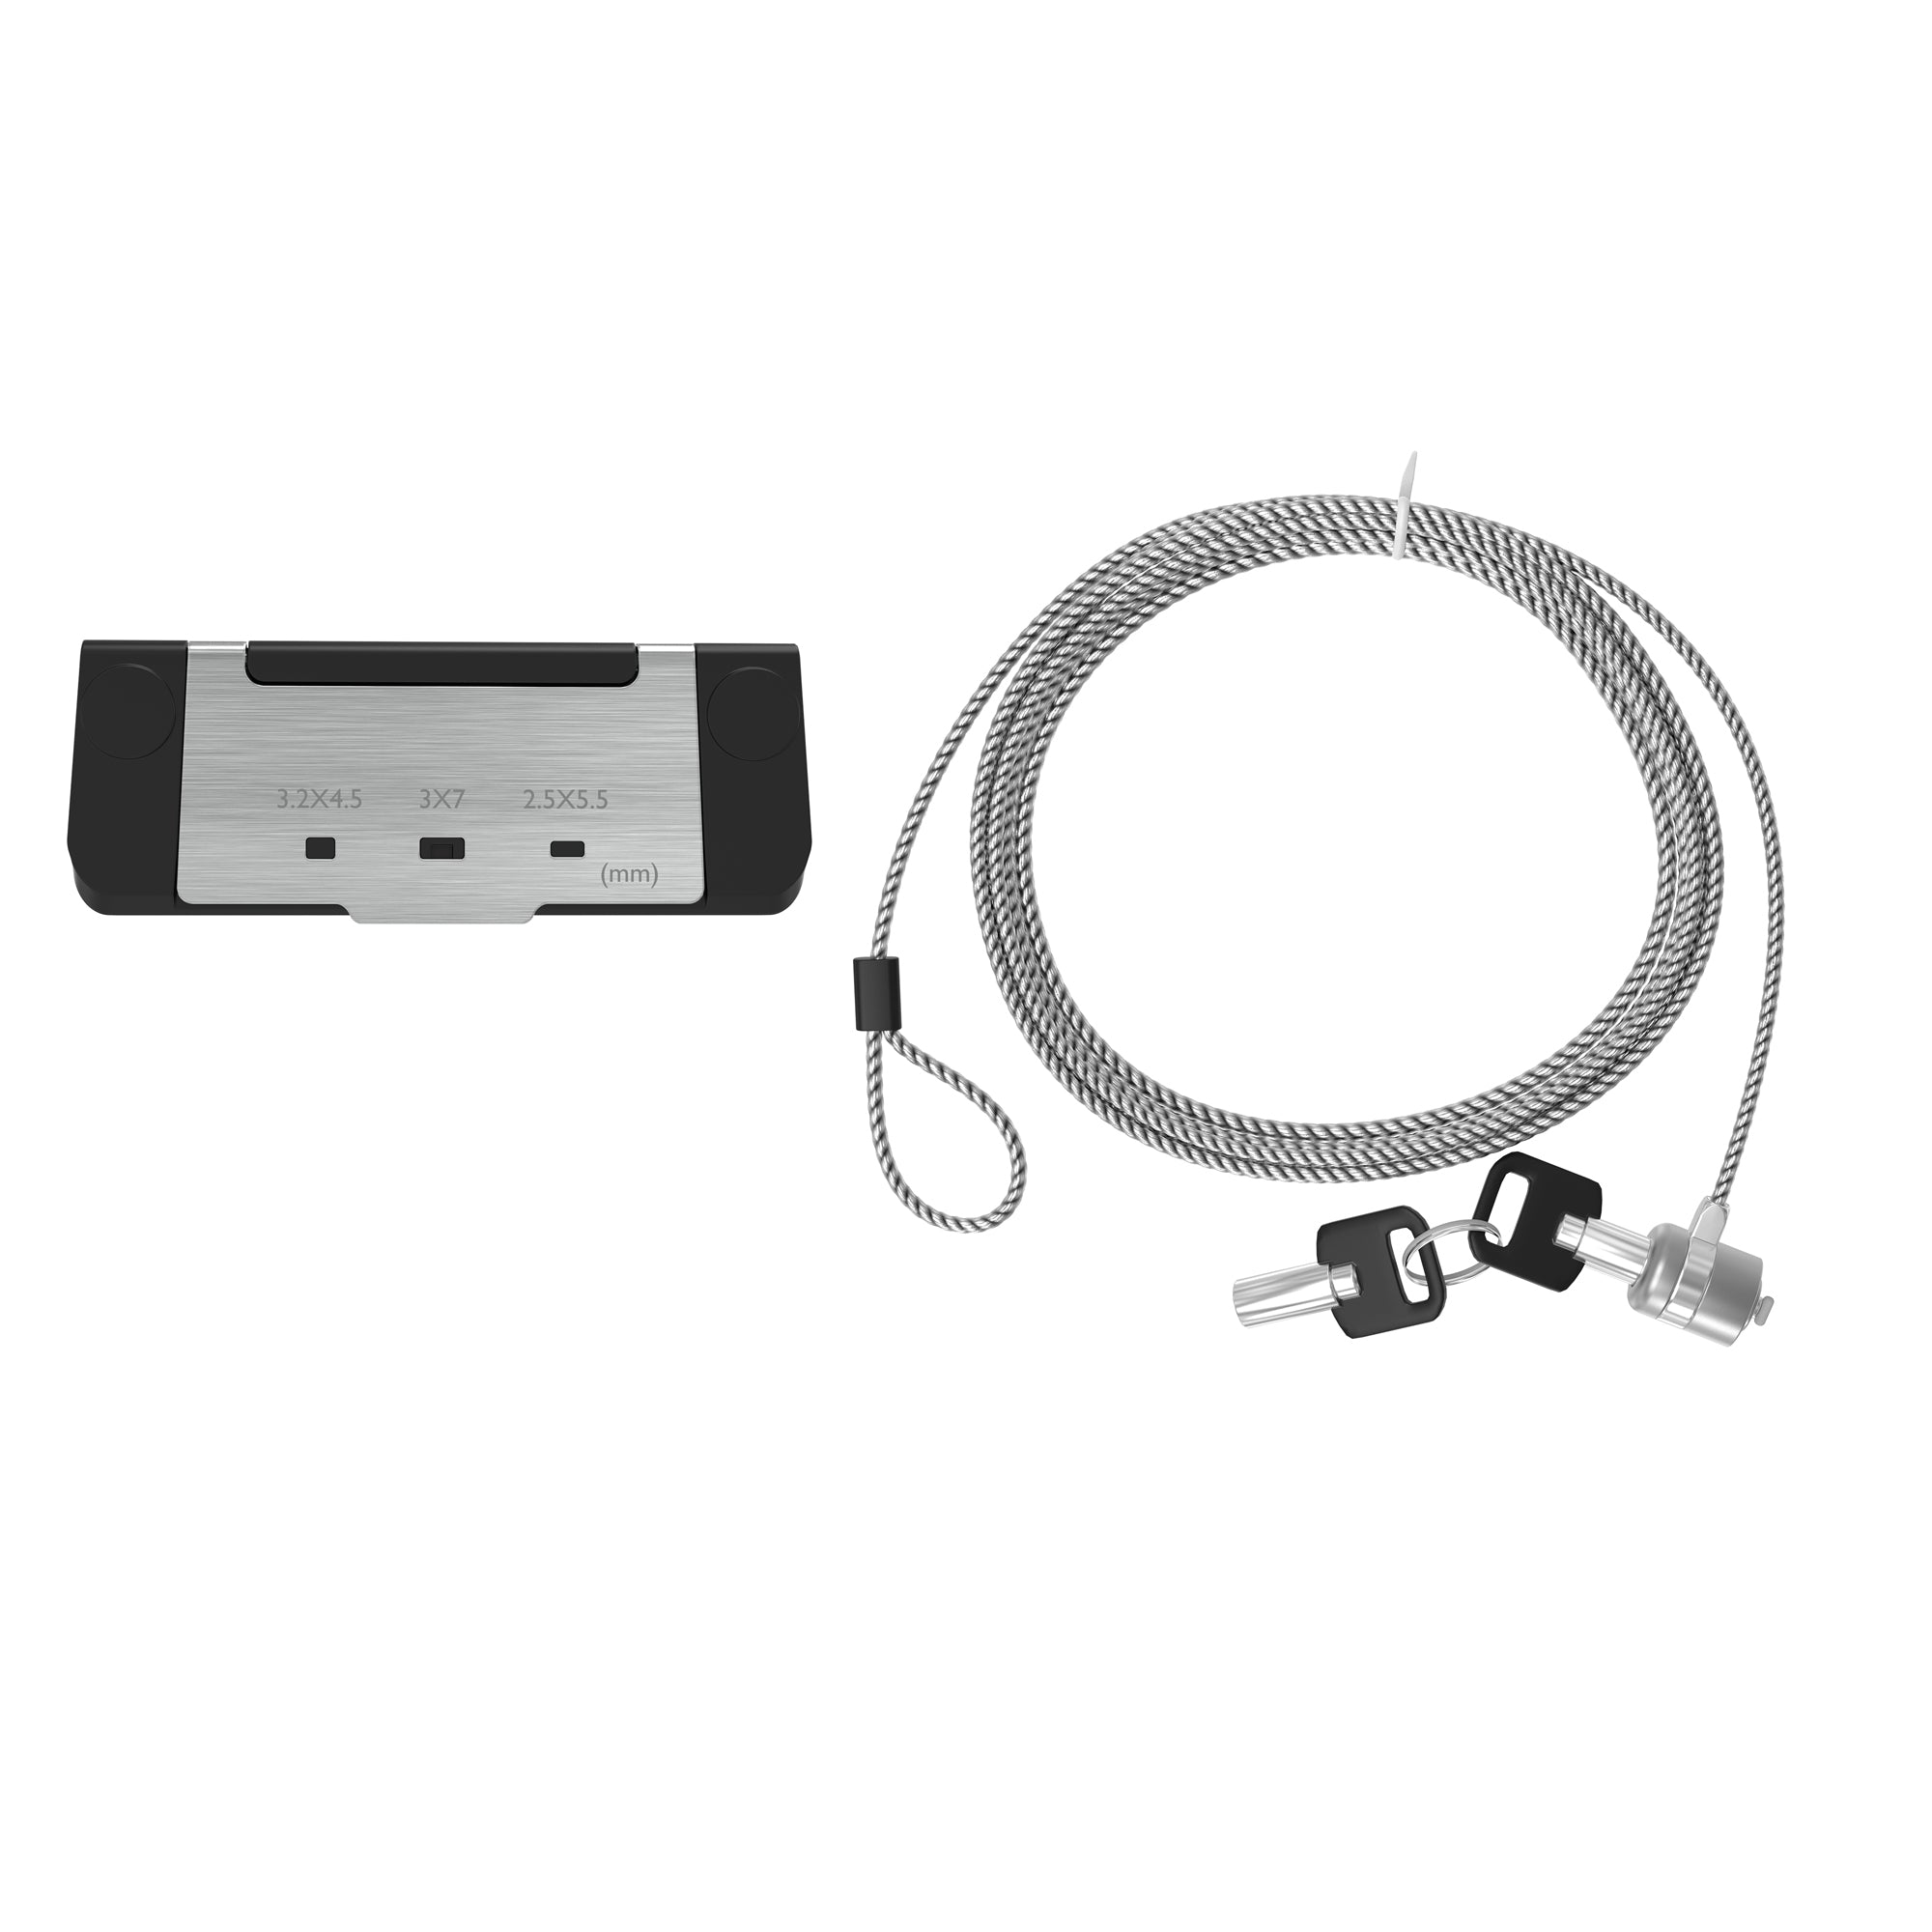 K-Slot Lock Kit for Wireless Keyboards & Other Accessories